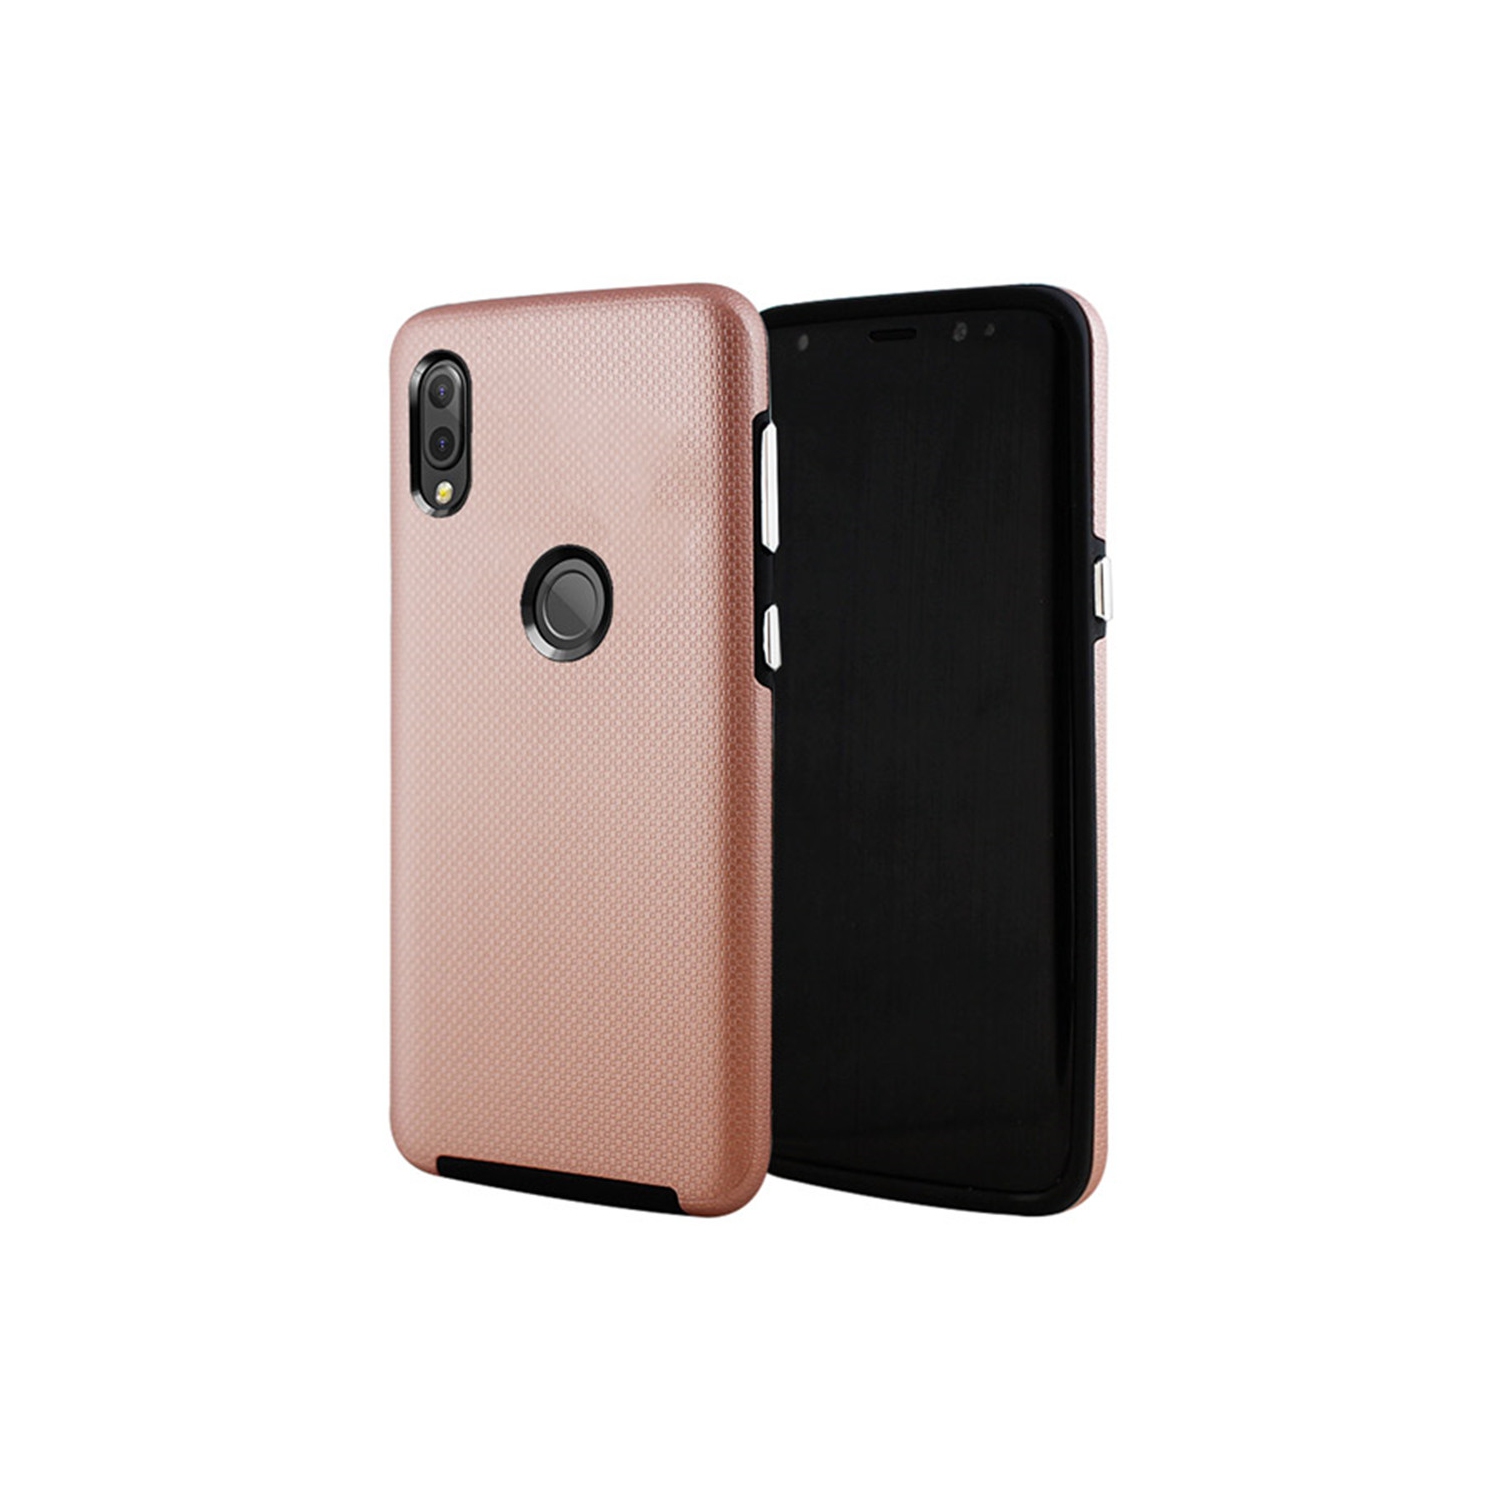 【CSmart】 Slim Fitted Hybrid Hard PC Shell Shockproof Scratch Resistant Case Cover for Samsung Galaxy A20, Rose Gold